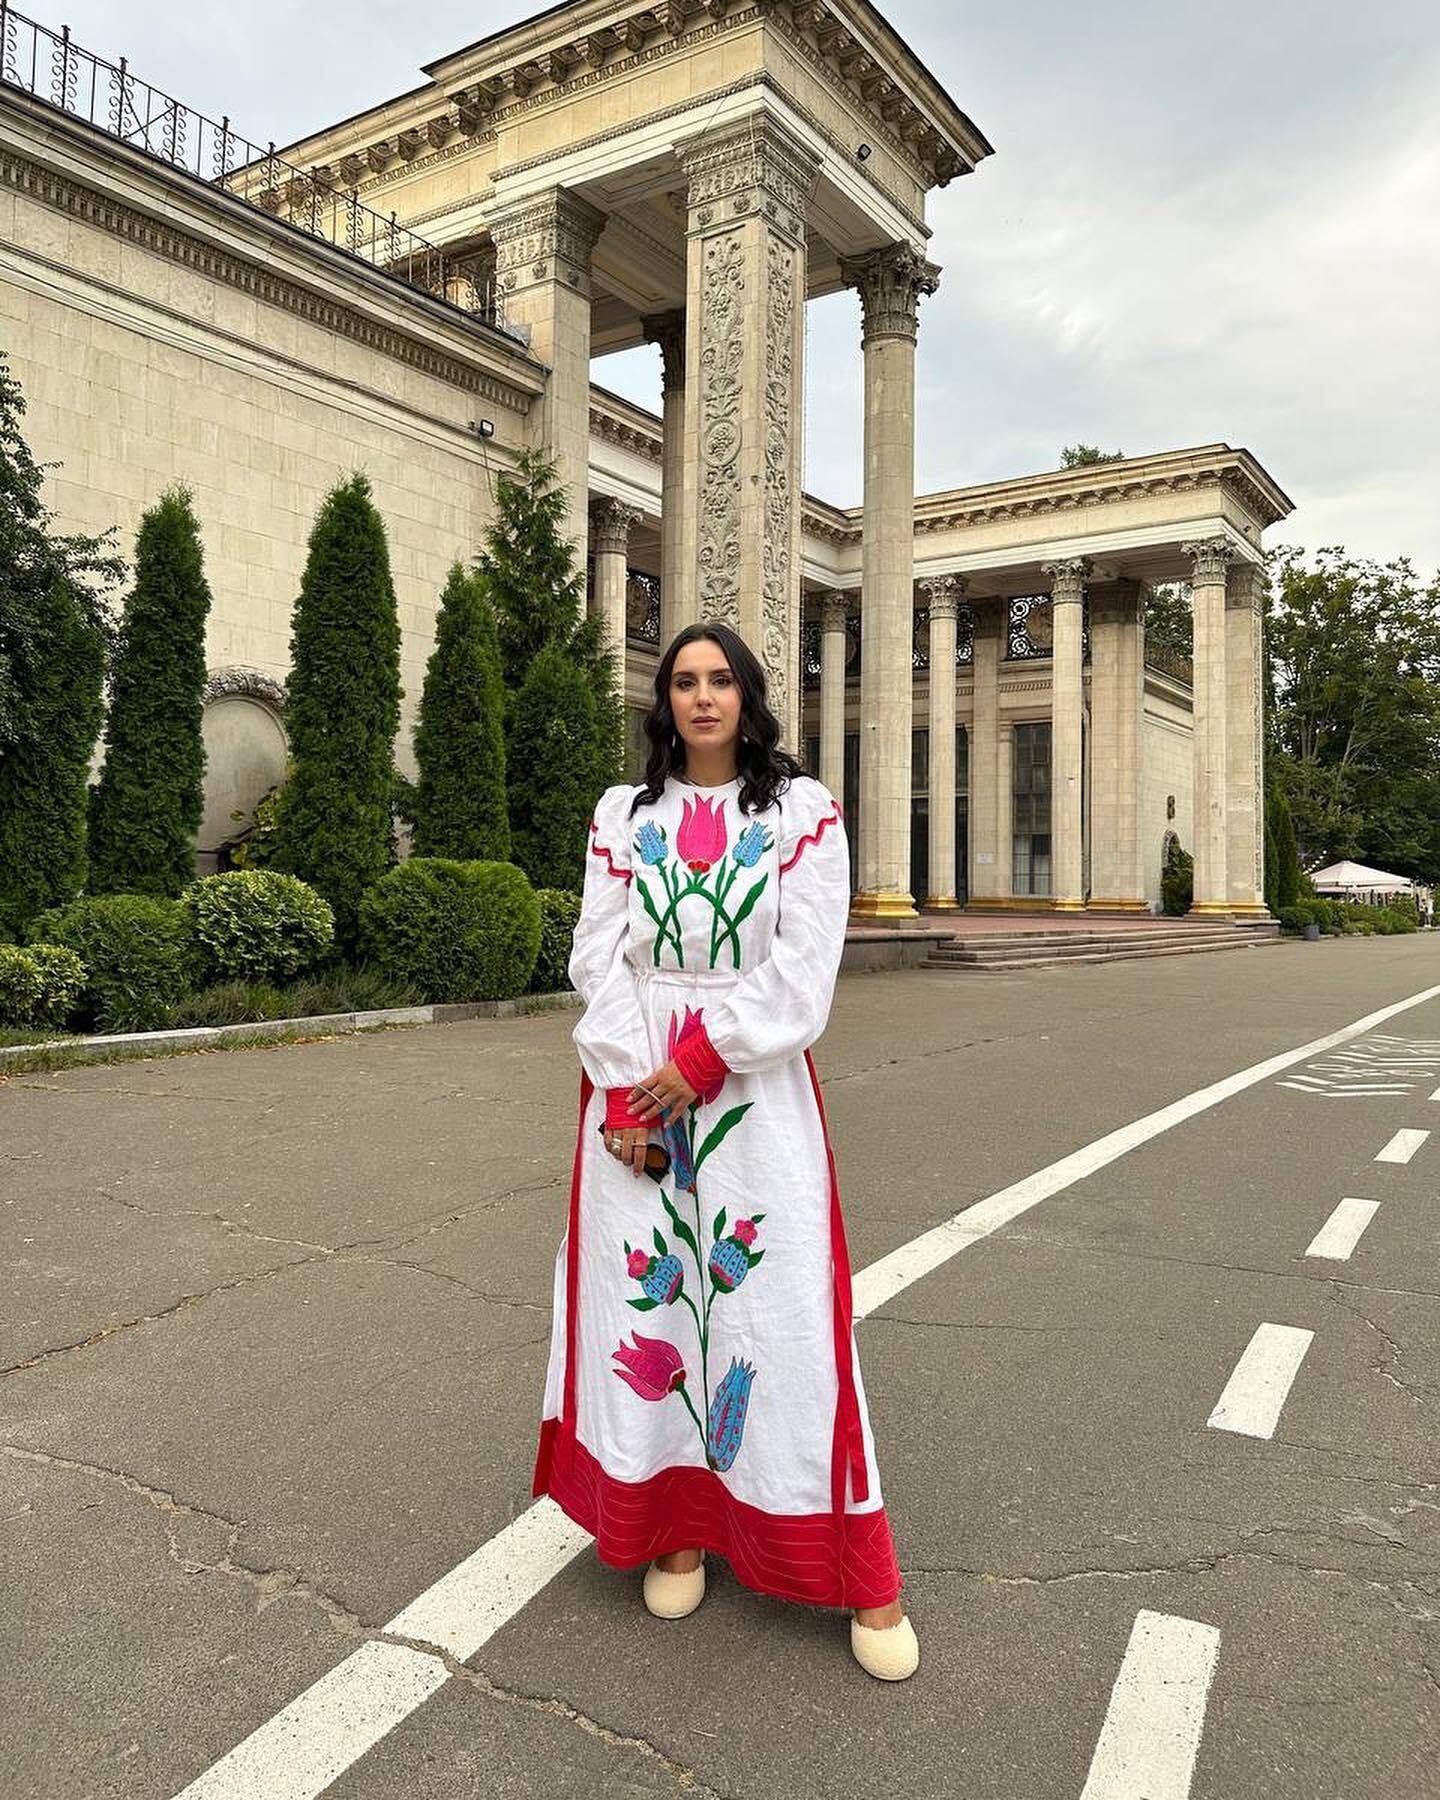 Russia is after Jamala's property in Crimea: the occupiers plan to ''nationalize'' it